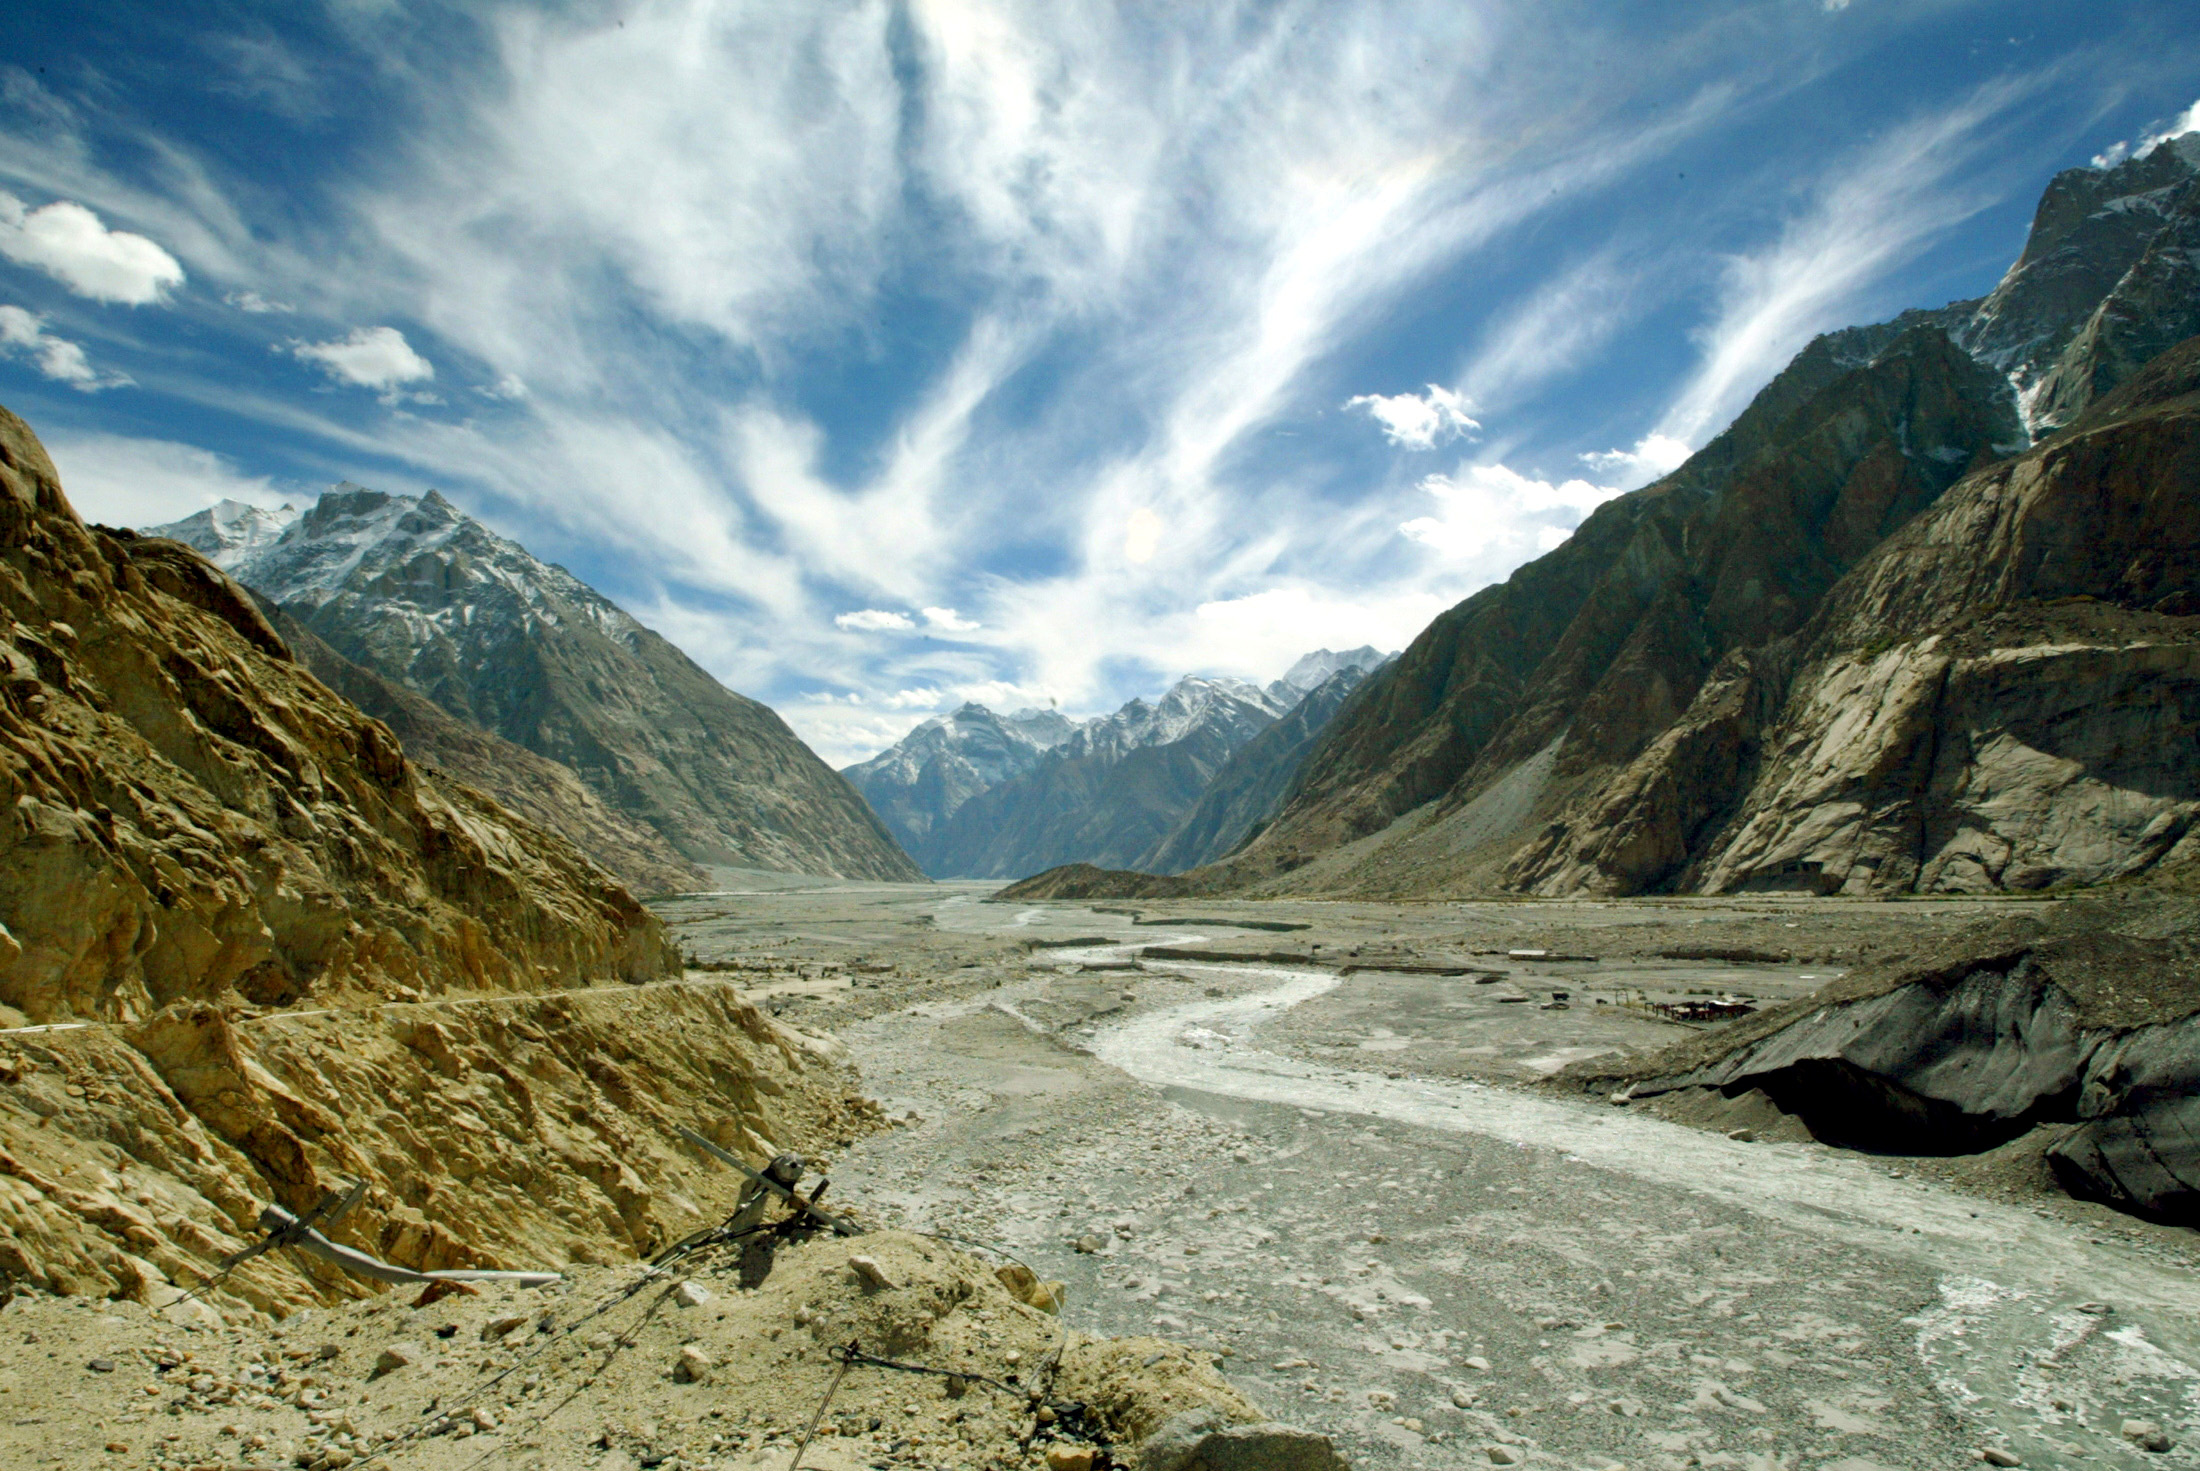 -PHOTO TAKEN 04OCT03- The Siachen Glacier, north of Indian state of Jammu and Kashmir. Since 1984, I..